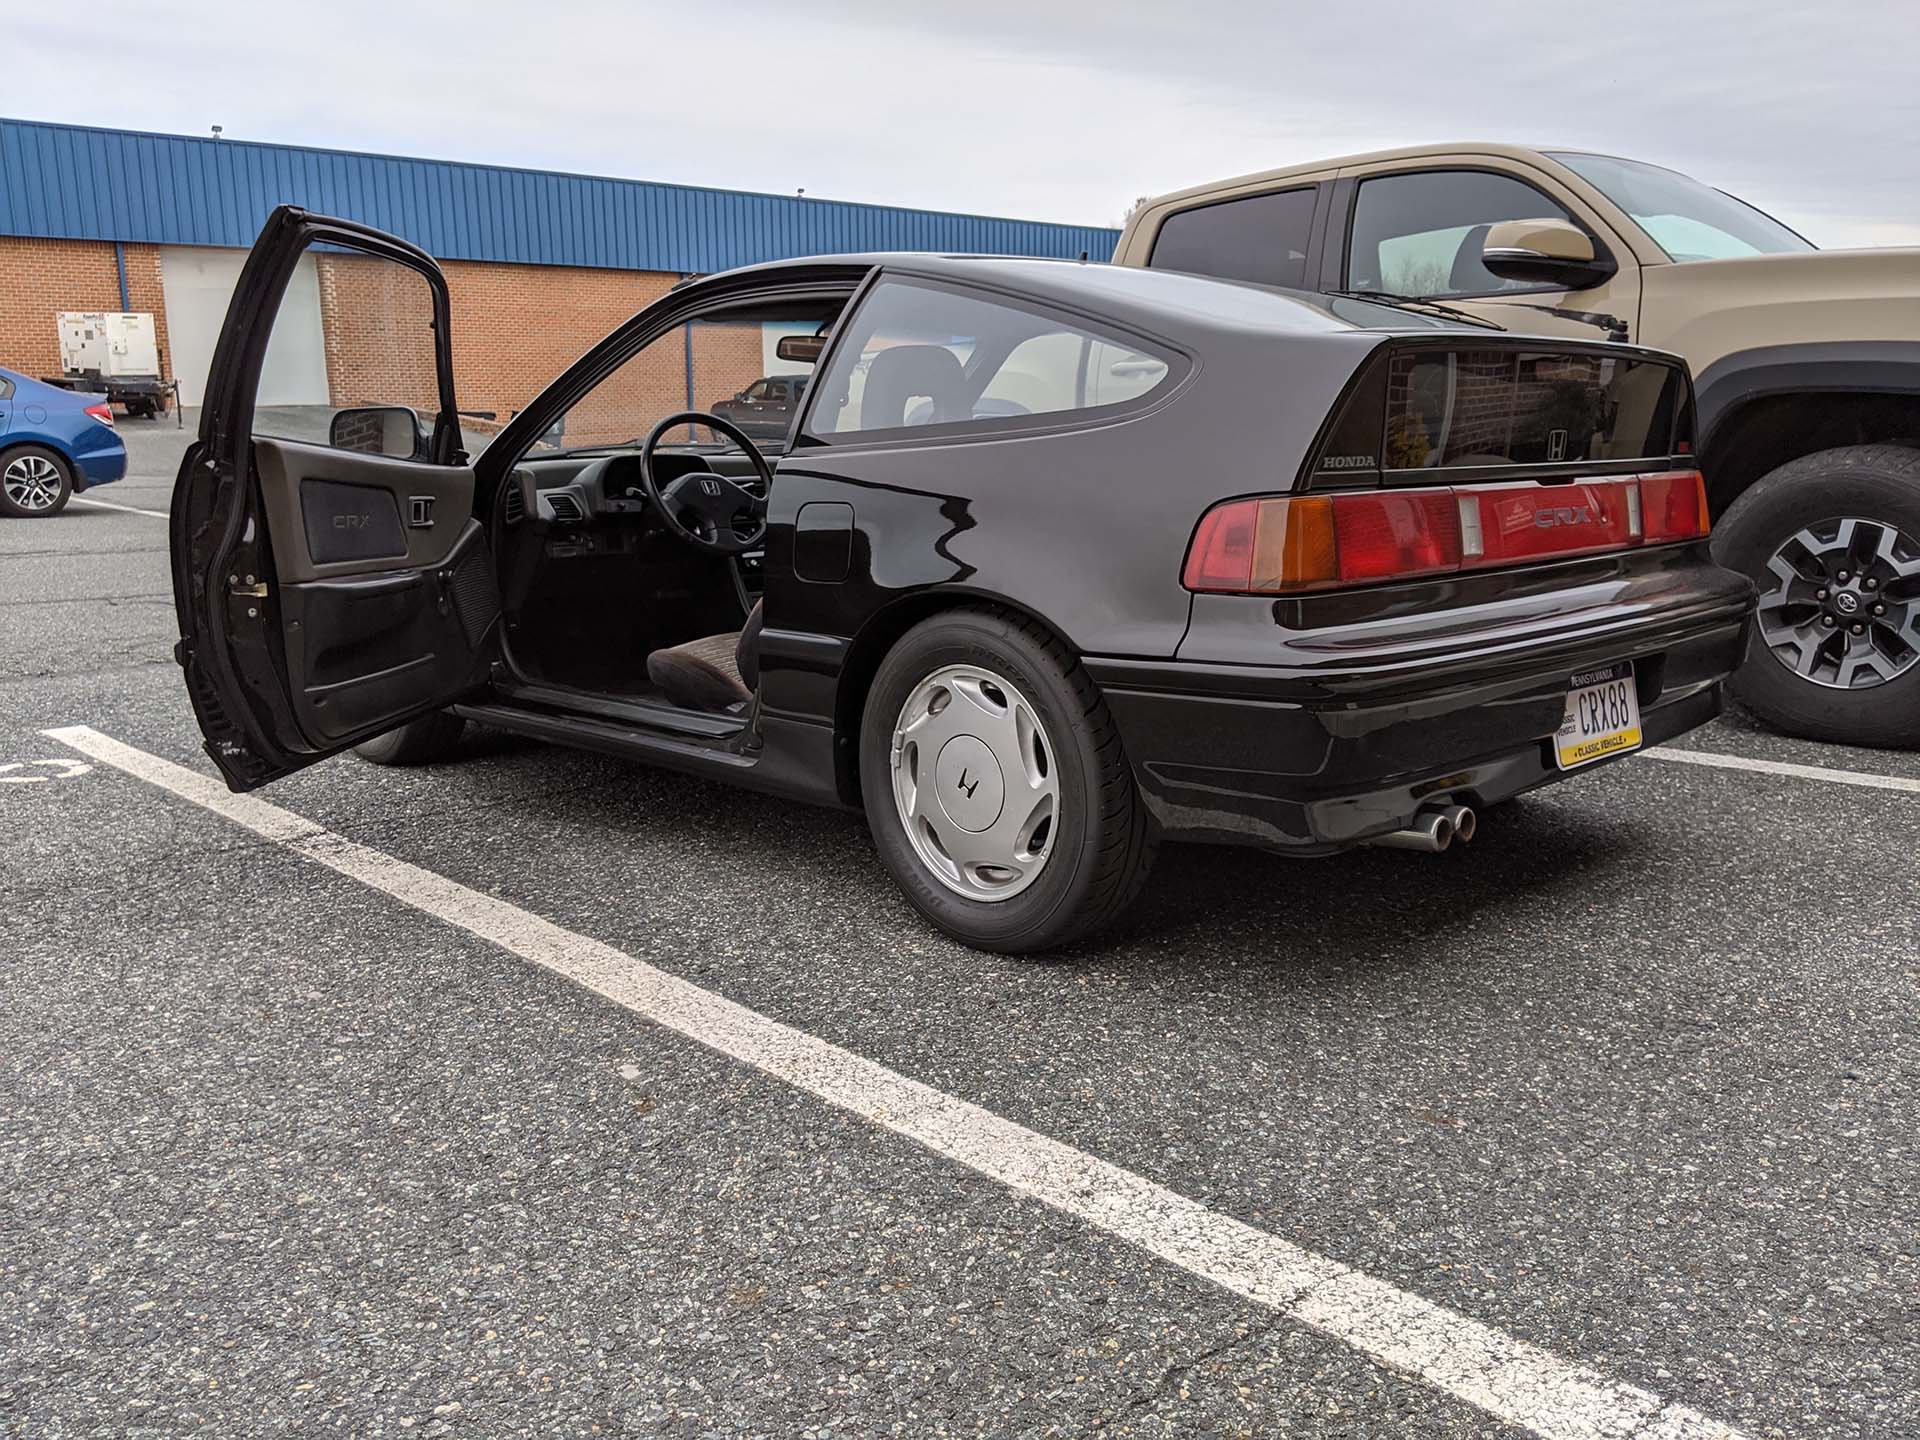 The CRX After the Transmission and Suspension Upgrades